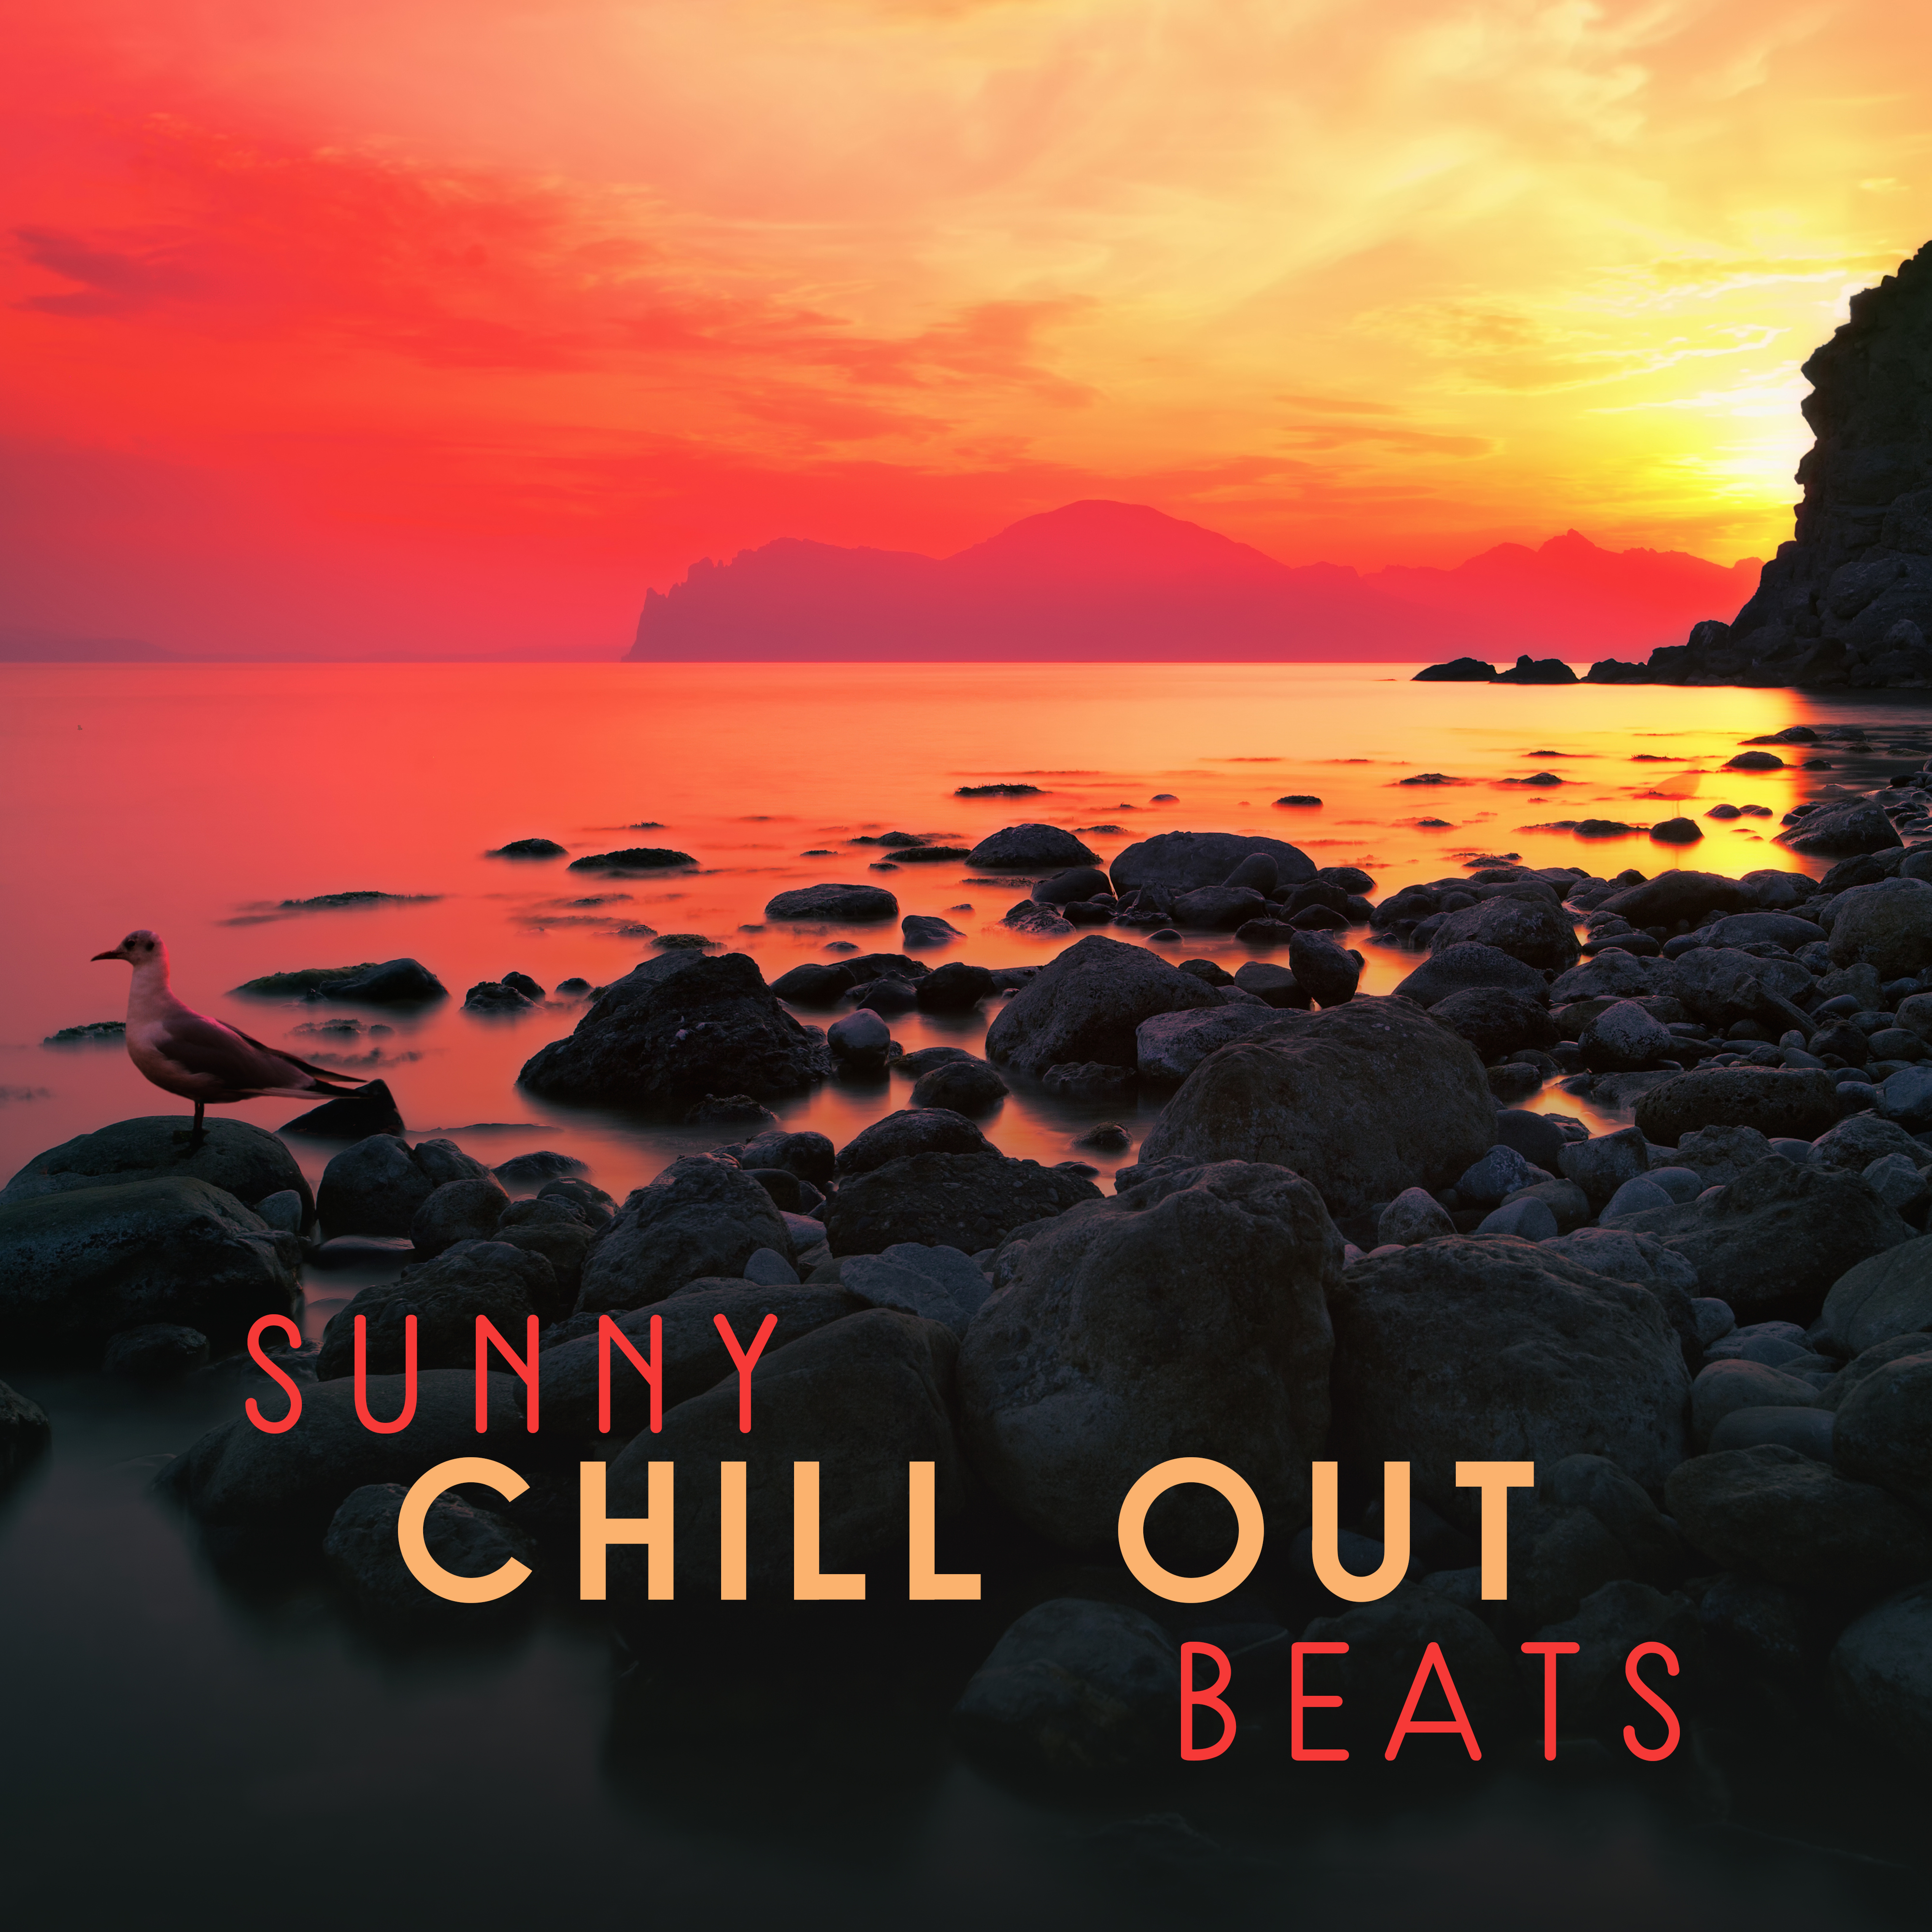 Sunny Chill Out Beats  Beach Relaxation, Calm Vibes to Rest, Beautiful Memories